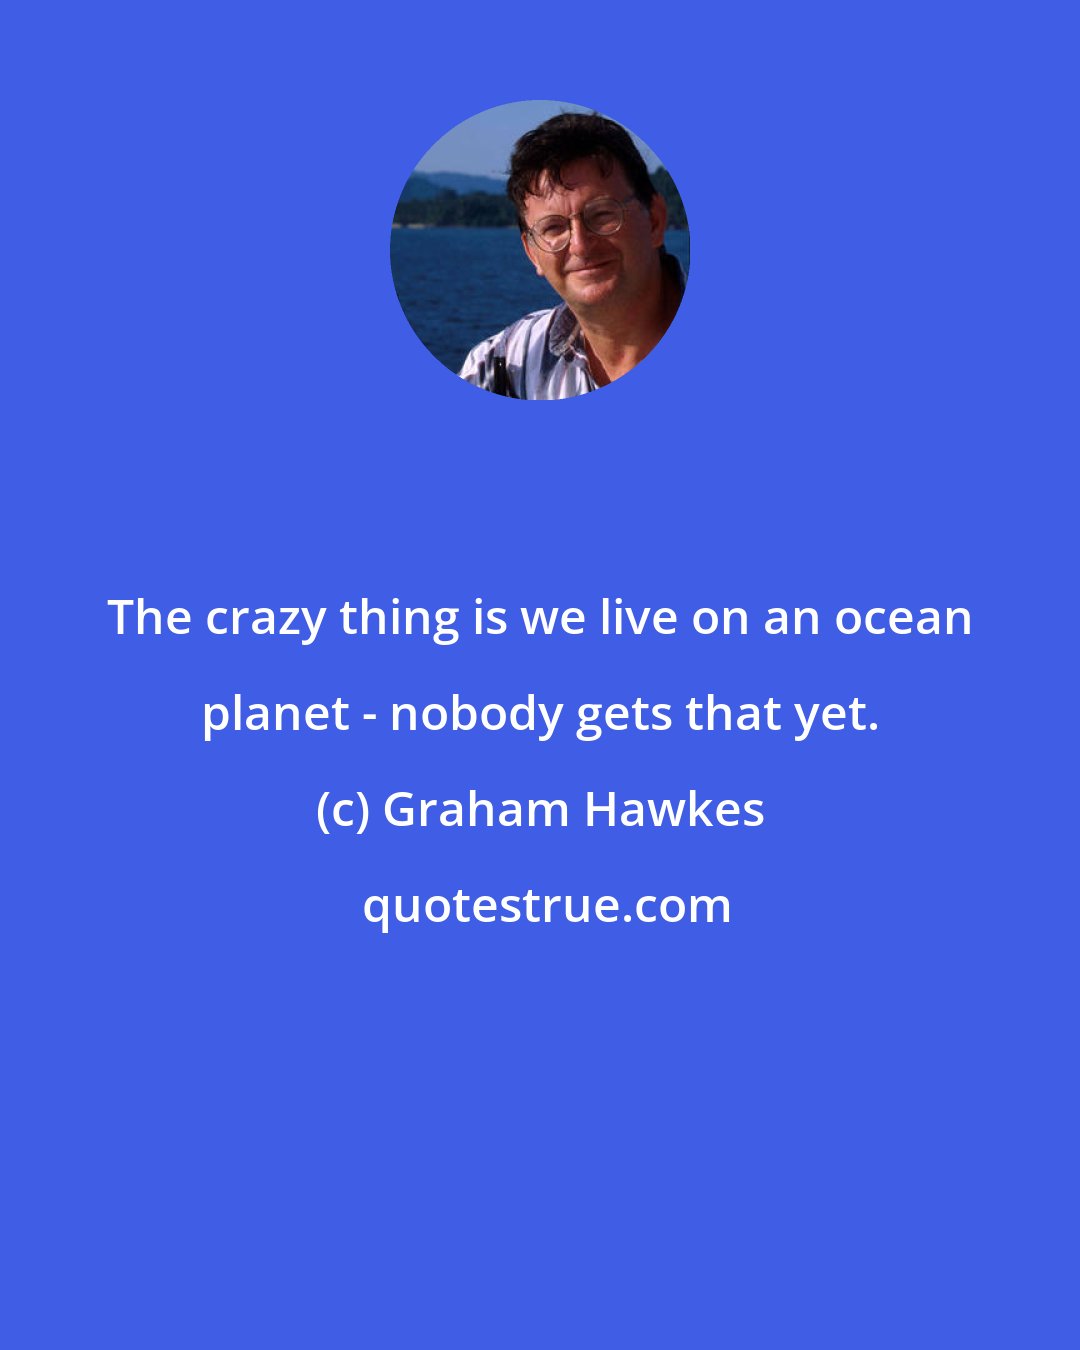 Graham Hawkes: The crazy thing is we live on an ocean planet - nobody gets that yet.